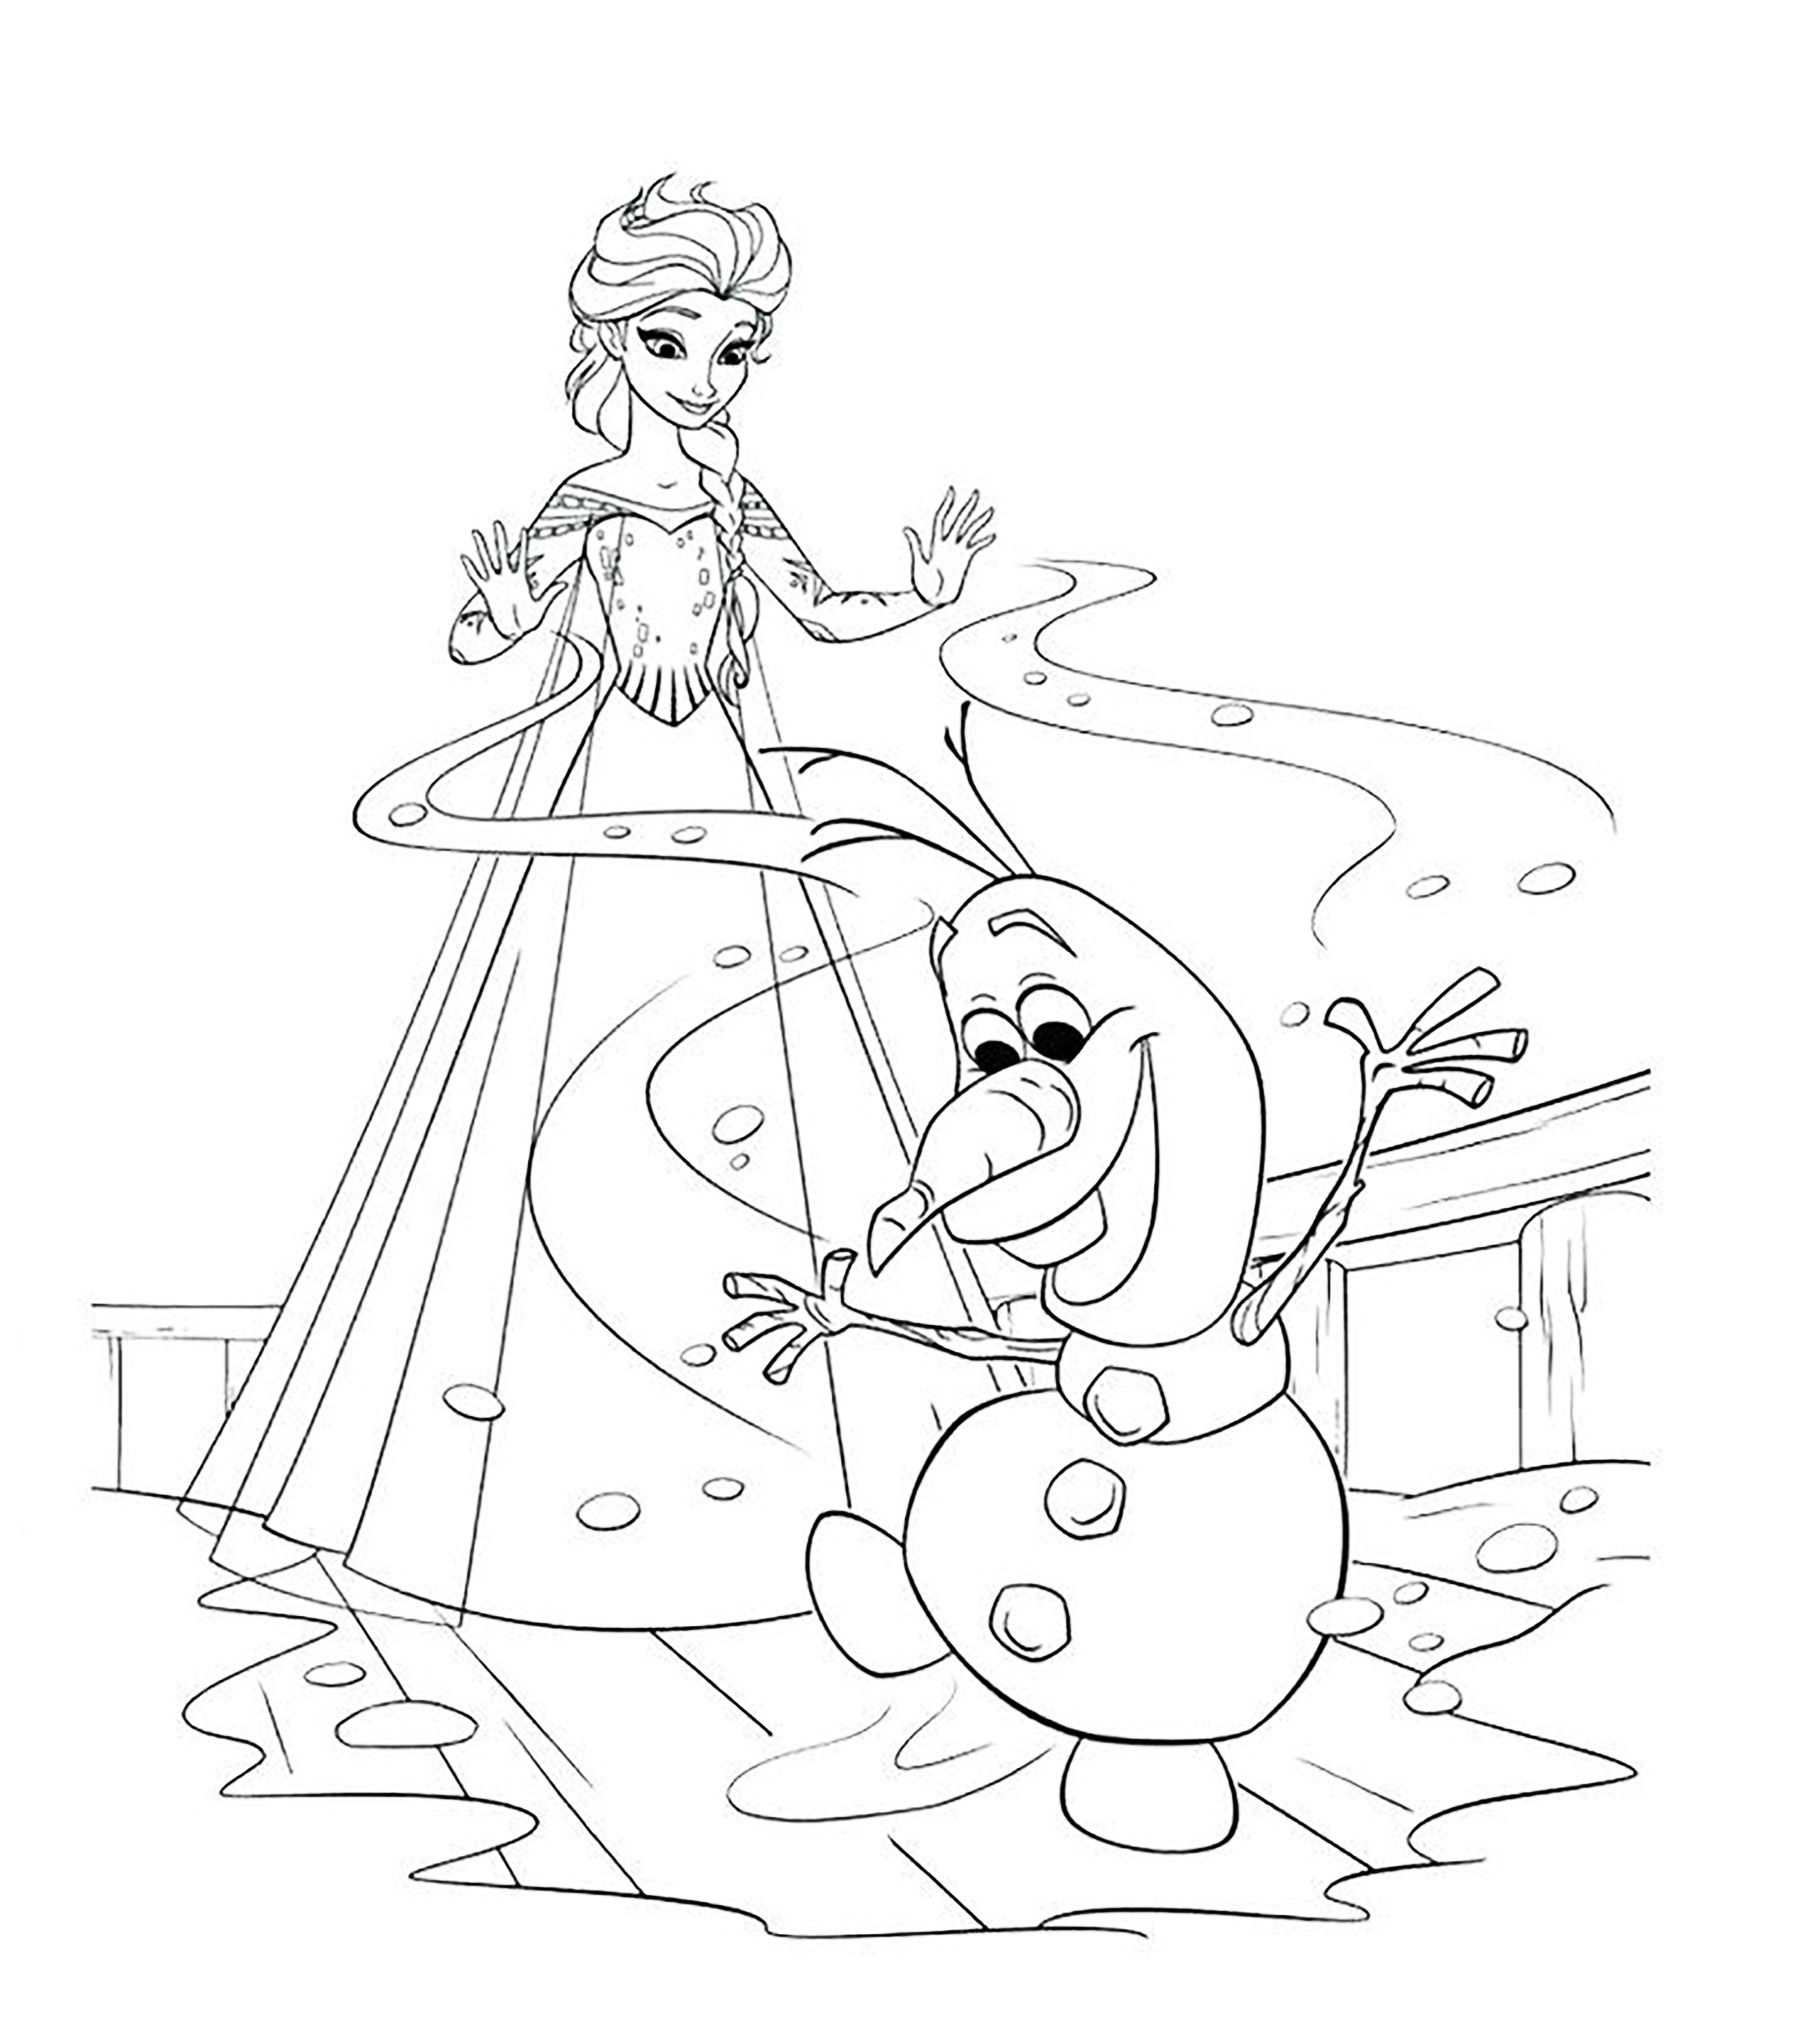 Elsa from Frozen Coloring Page » Coloring Clubhouse